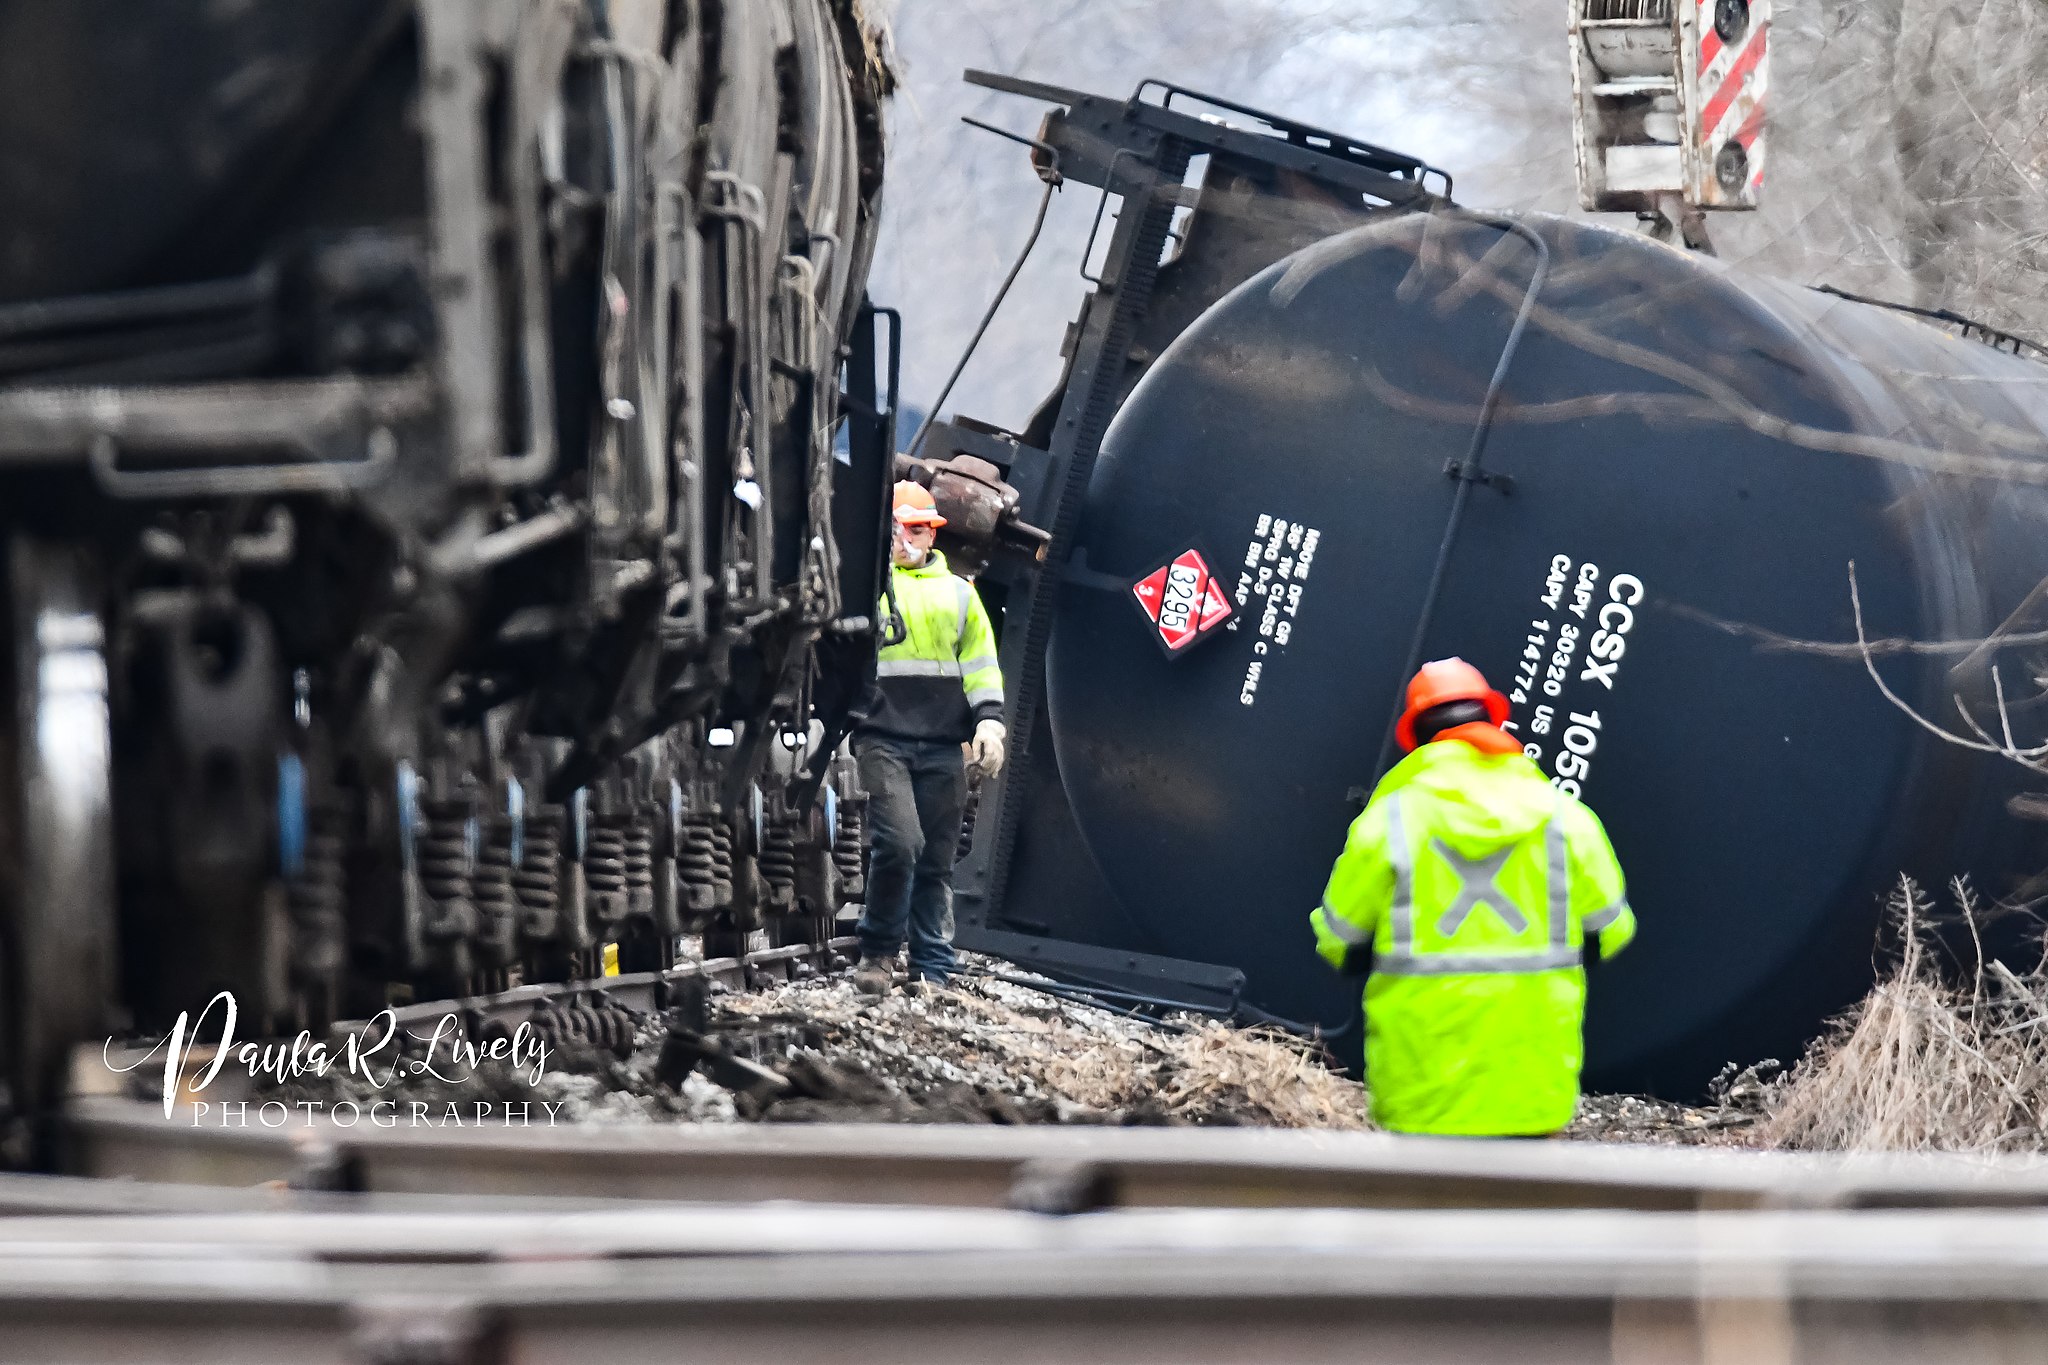 US Department of Transportation, EPA urge actions to ensure safety following Ohio train derailment